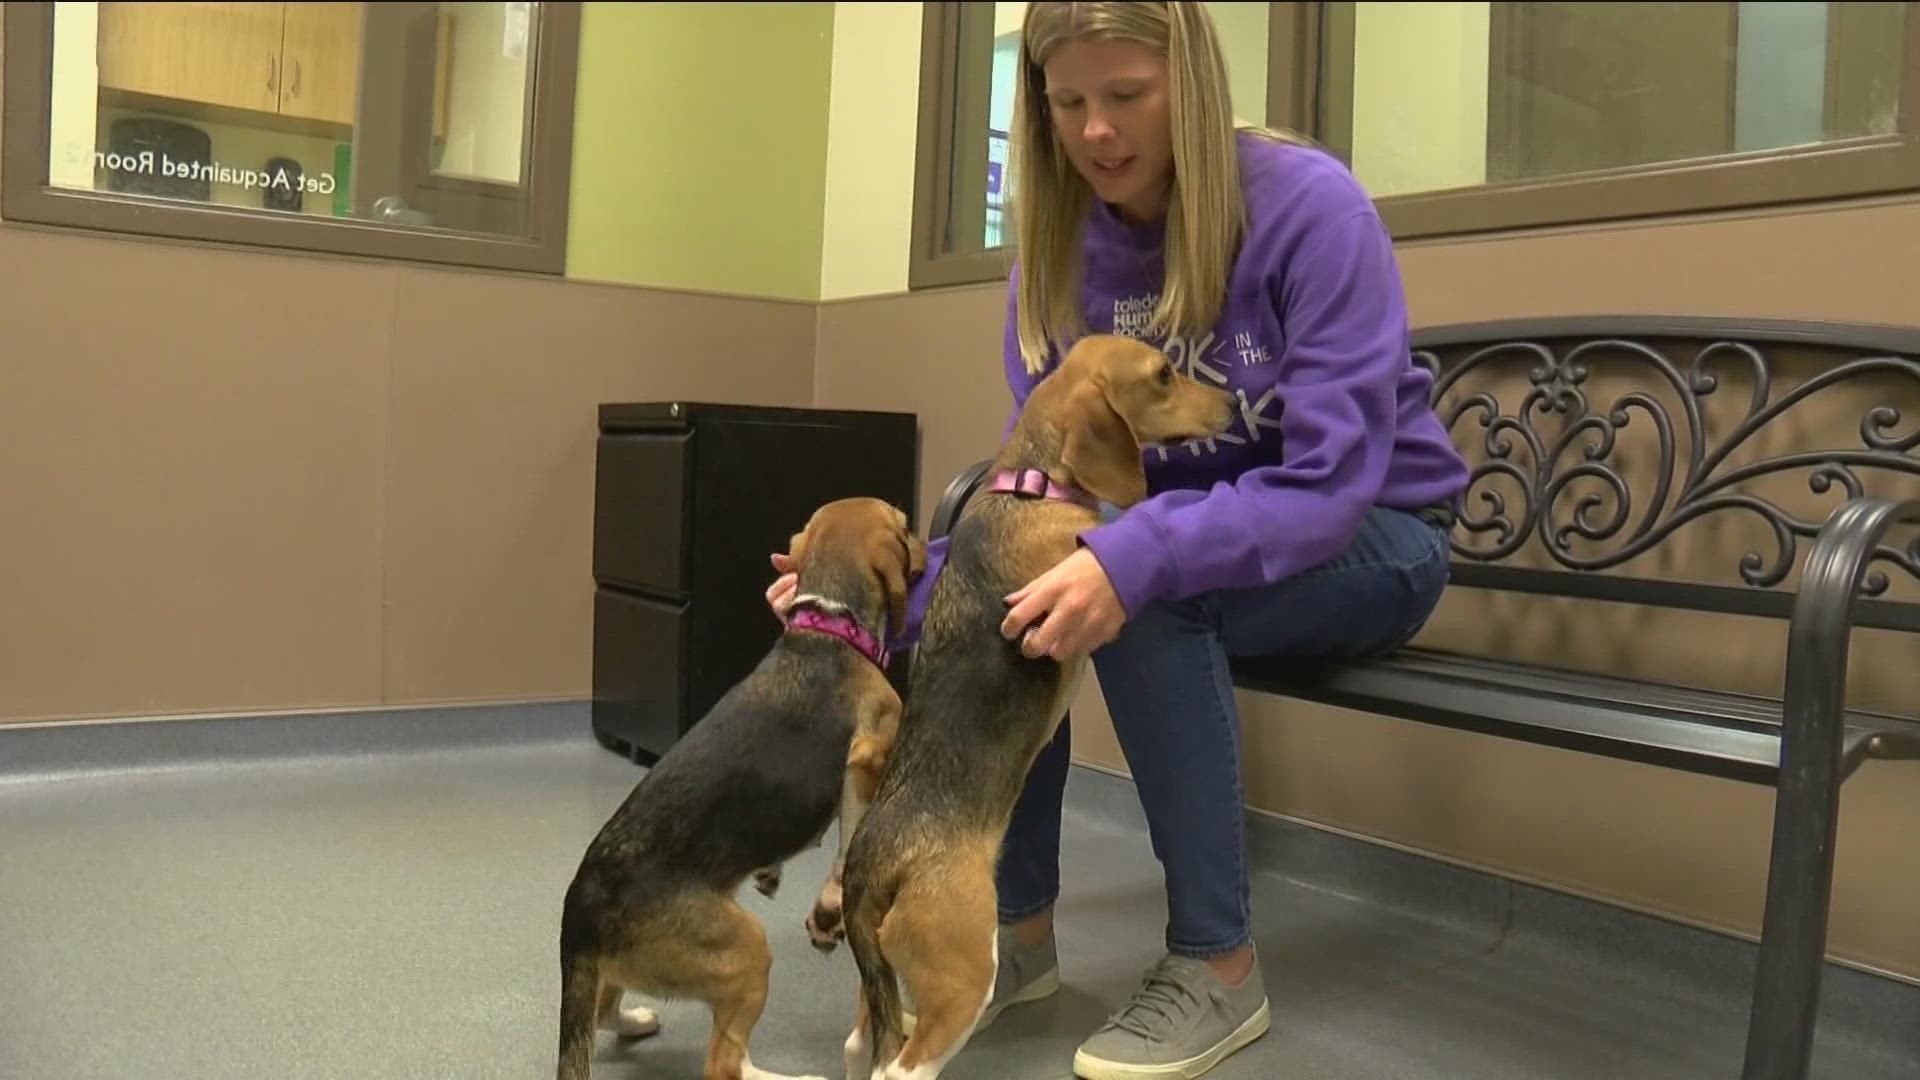 4,000 beagles were rescued from a mass breeding facility in Virginia owned by research company Envigo. Six arrived in Toledo and will soon be ready for forever homes